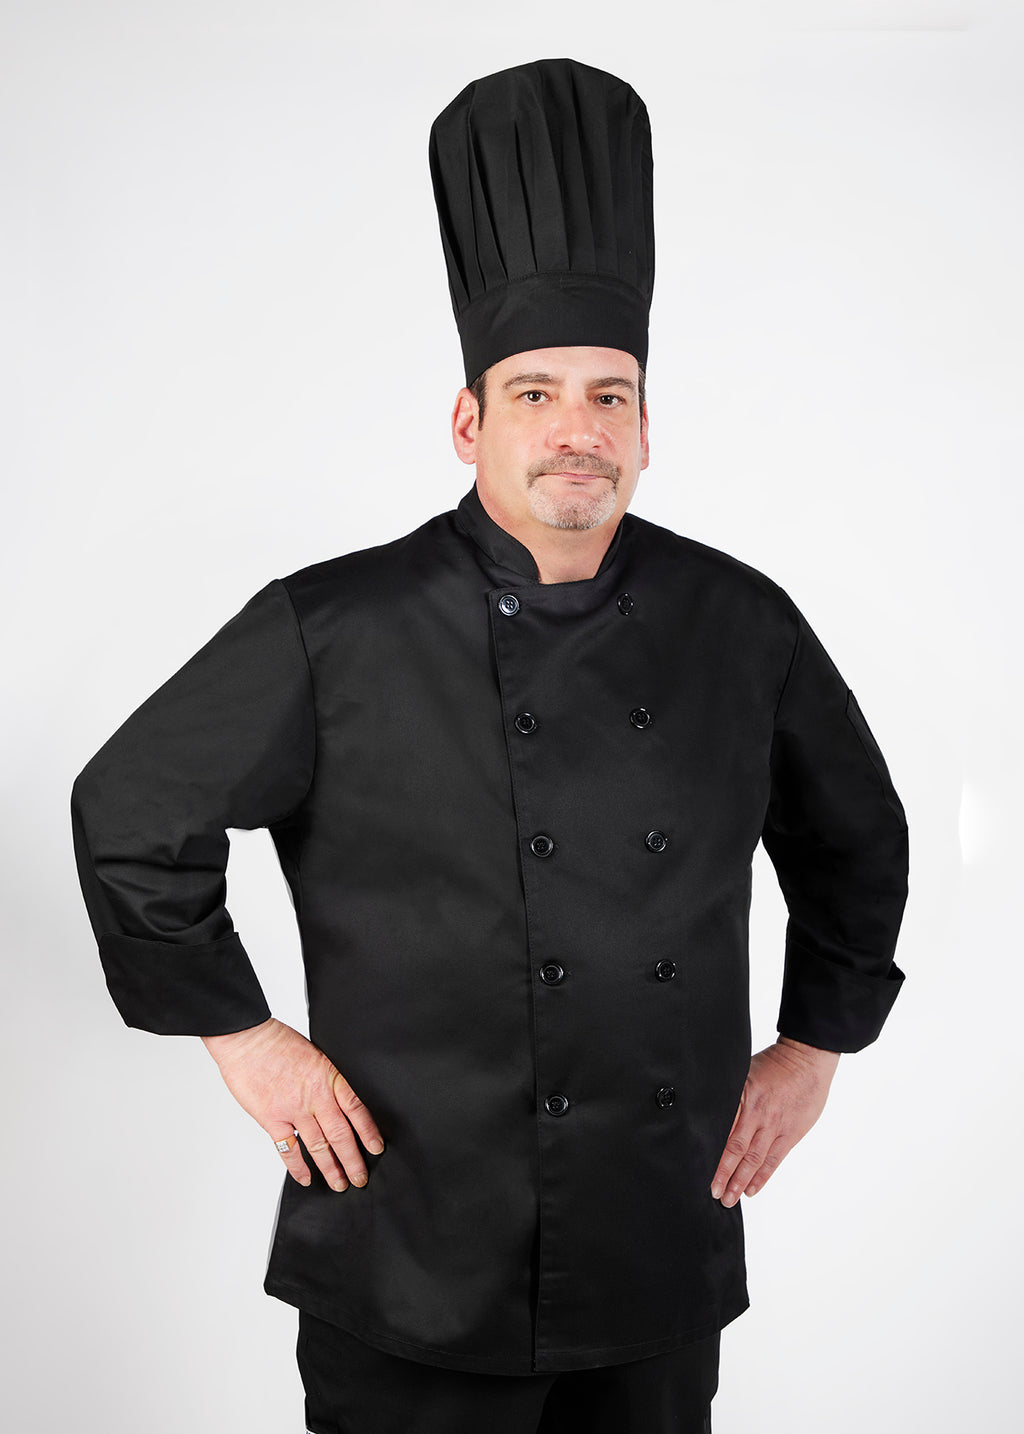 Product - MOBB Traditional Chef Hat